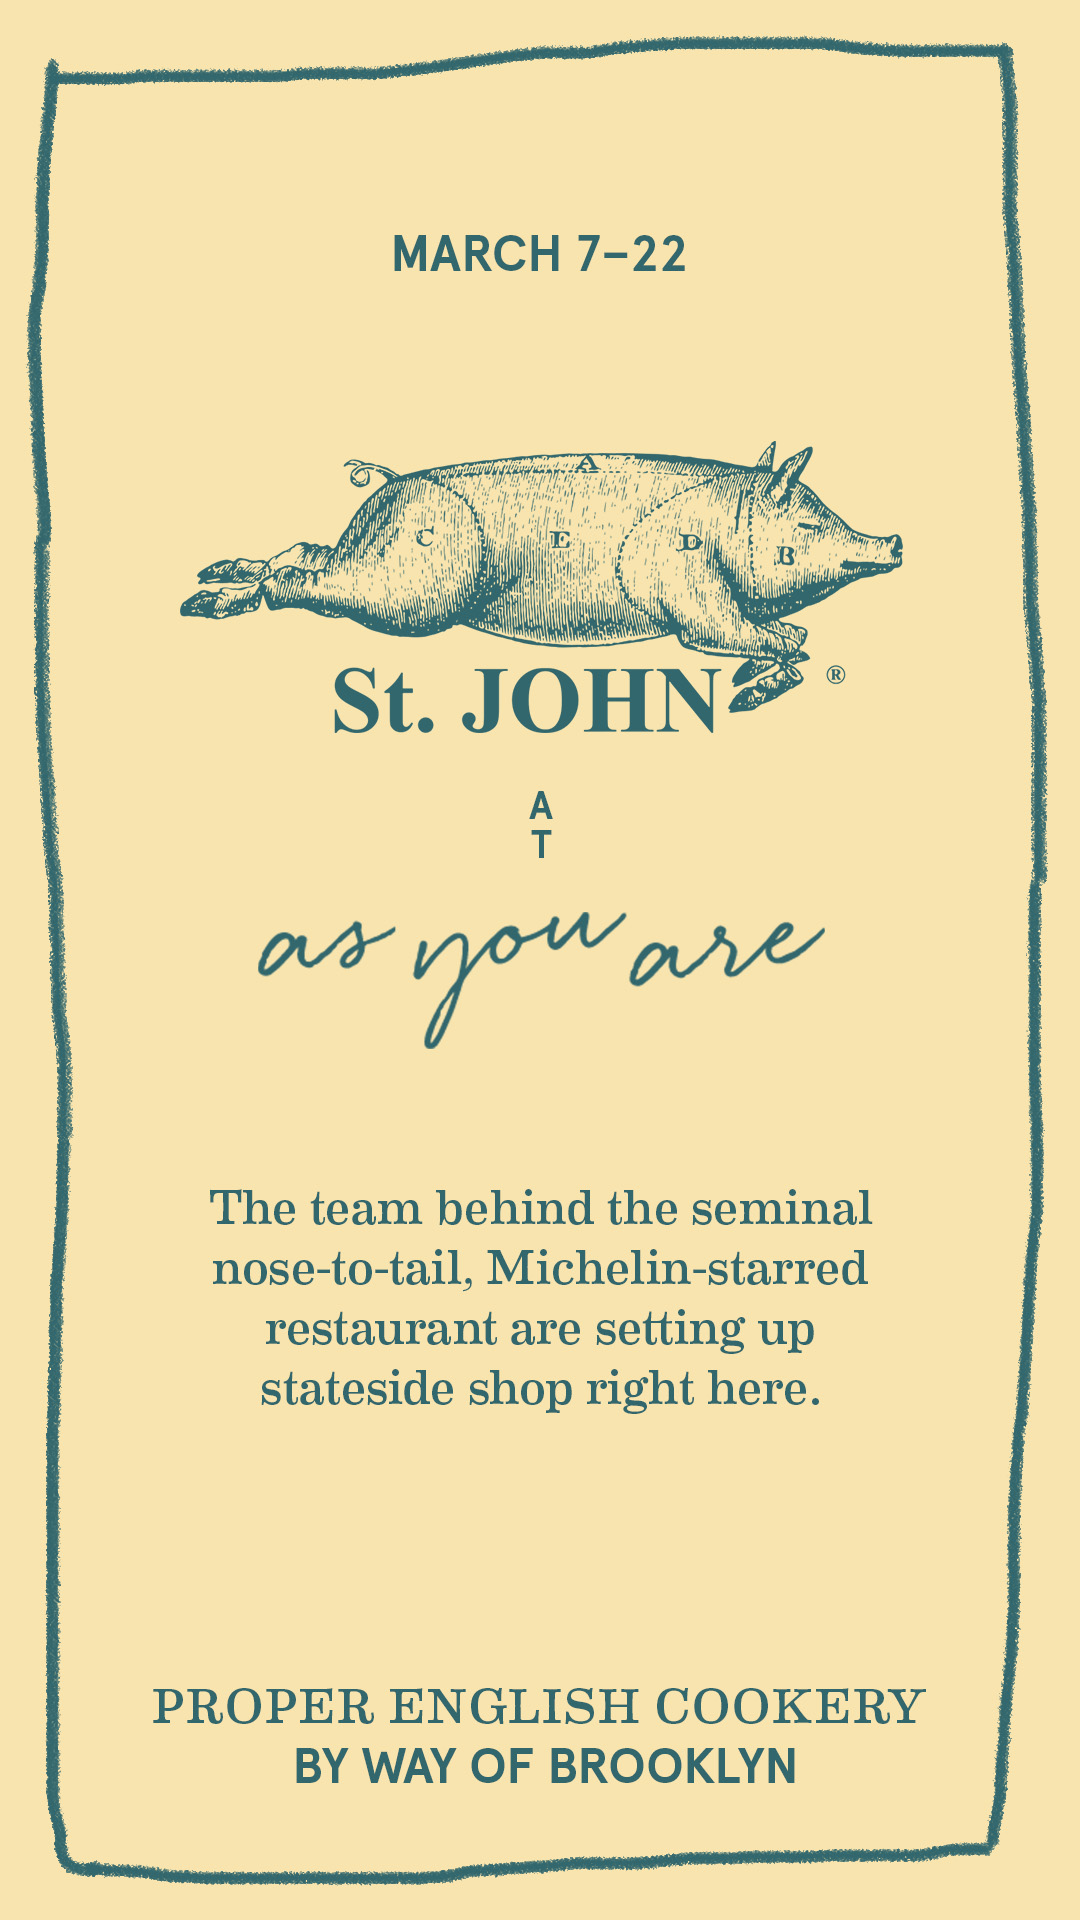 Flyer with details for collaboration between St John and As You Are restaurants